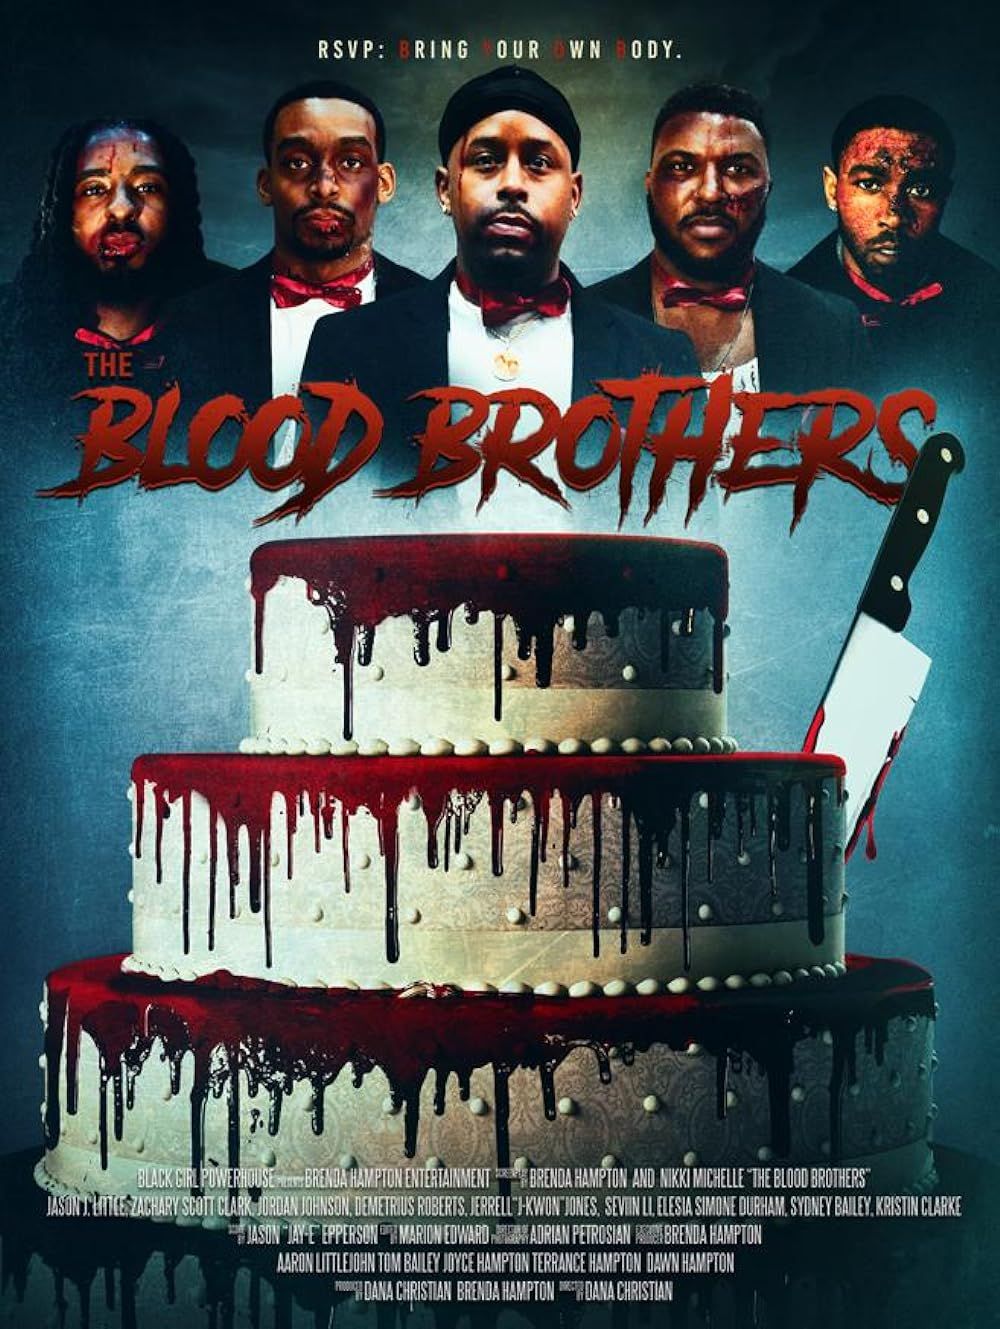 The Blood Brothers